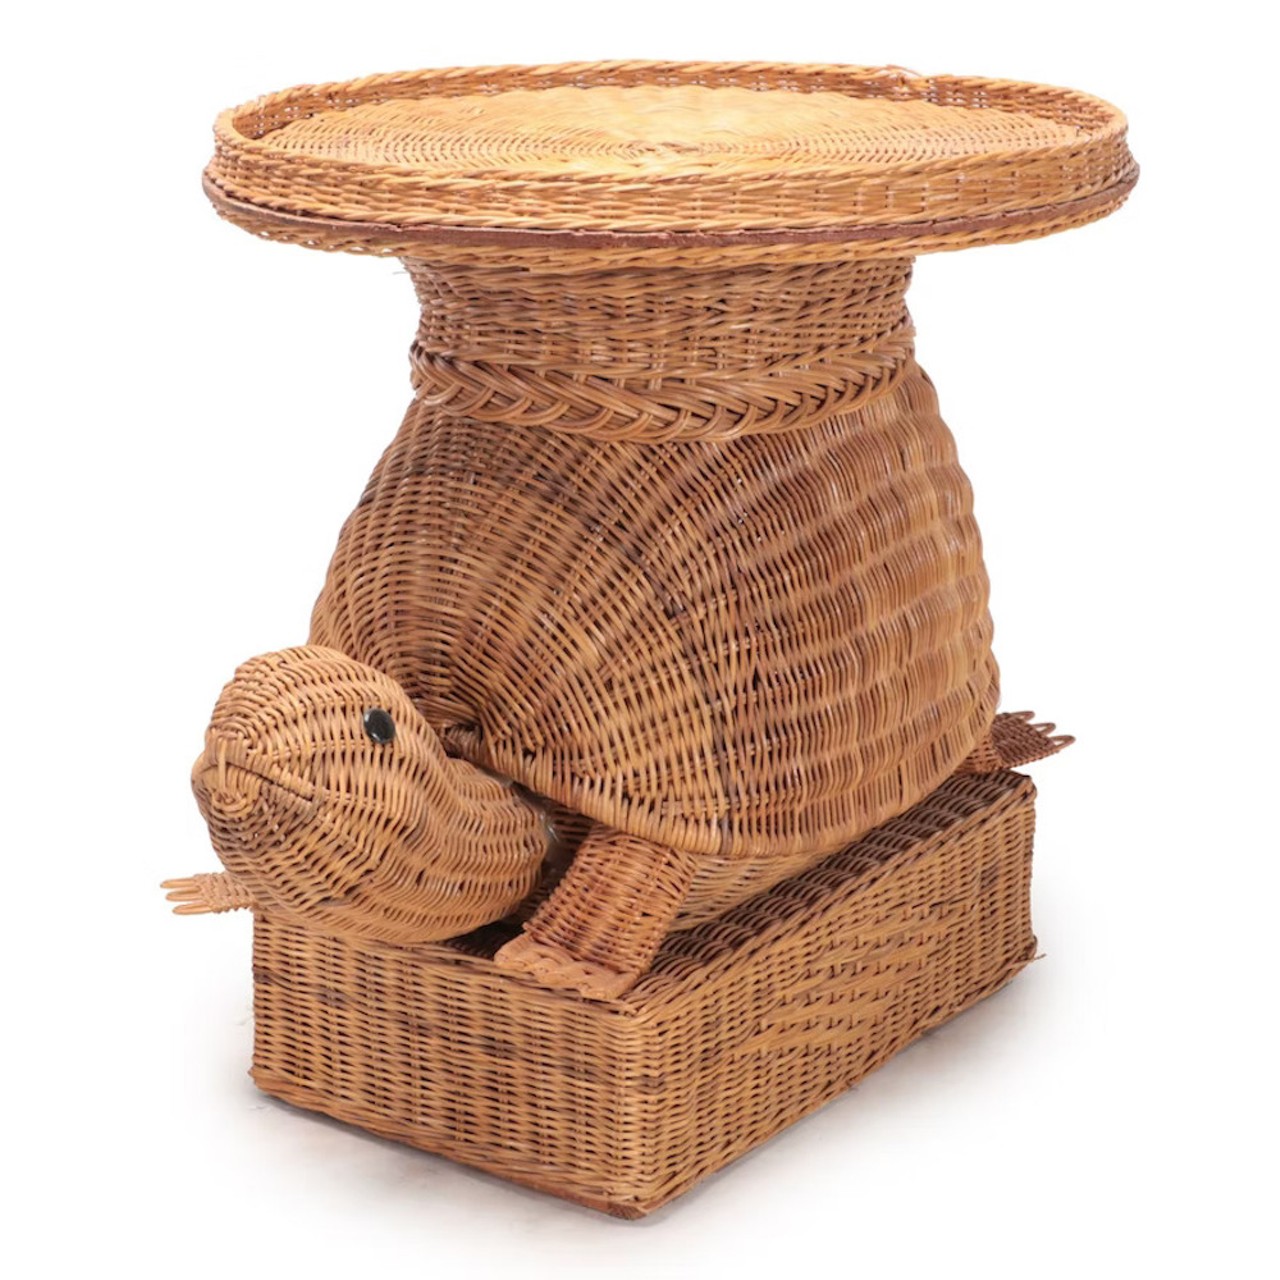 Wicker Turtle Form Side Table, Mid-20th Century
This wicker turtle side table somehow functions as both a funny gag gift and a legitimate home decor staple your Secret Santa can love forever. The item description pegs this guy as being from the mid-20th Century, but still in great shape.